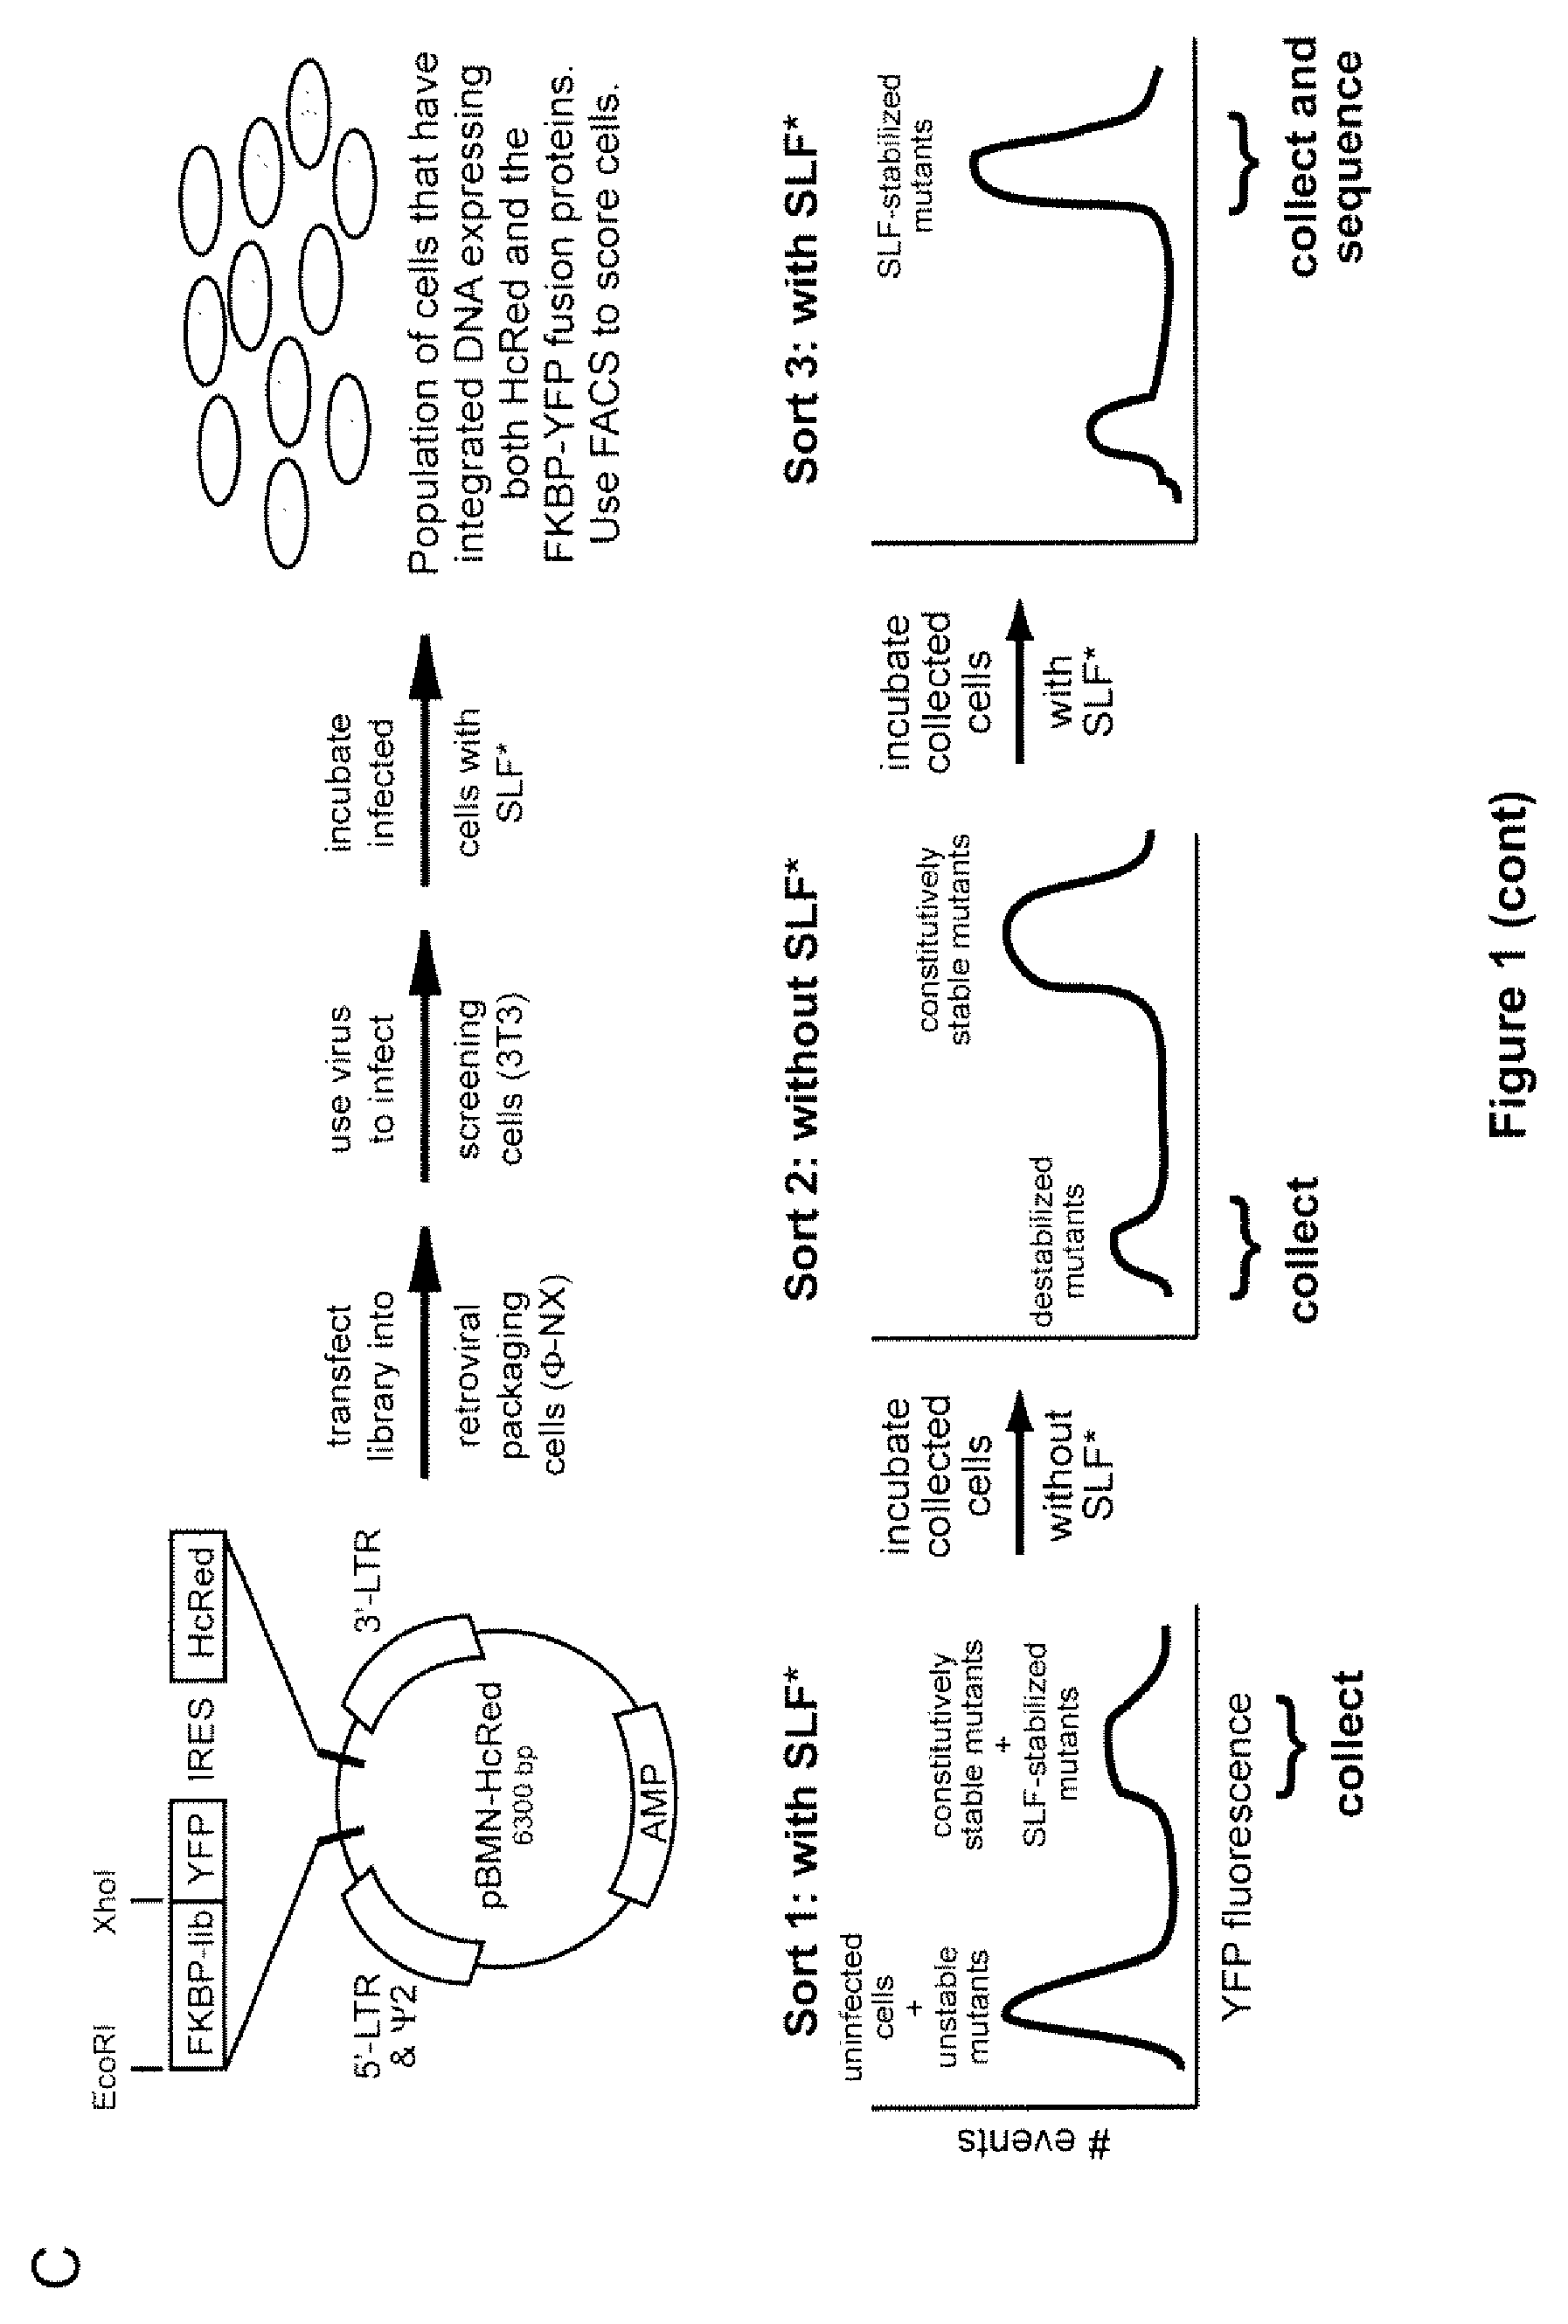 Method for regulating protein function in cells using synthetic small molecules